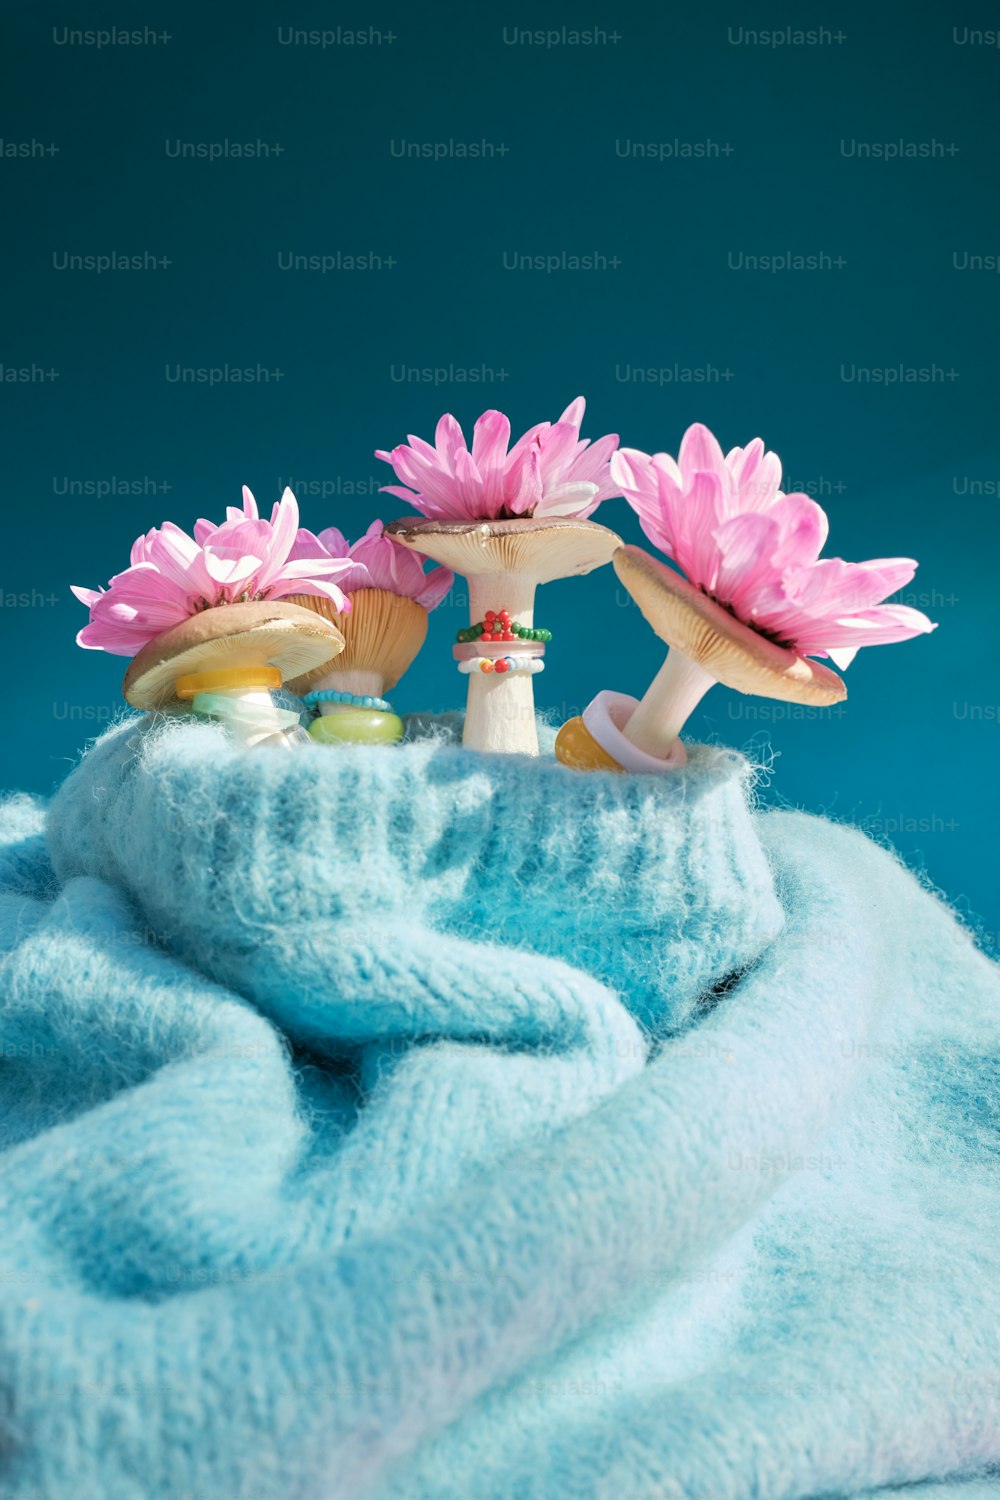 a couple of pink flowers sitting on top of a blue blanket